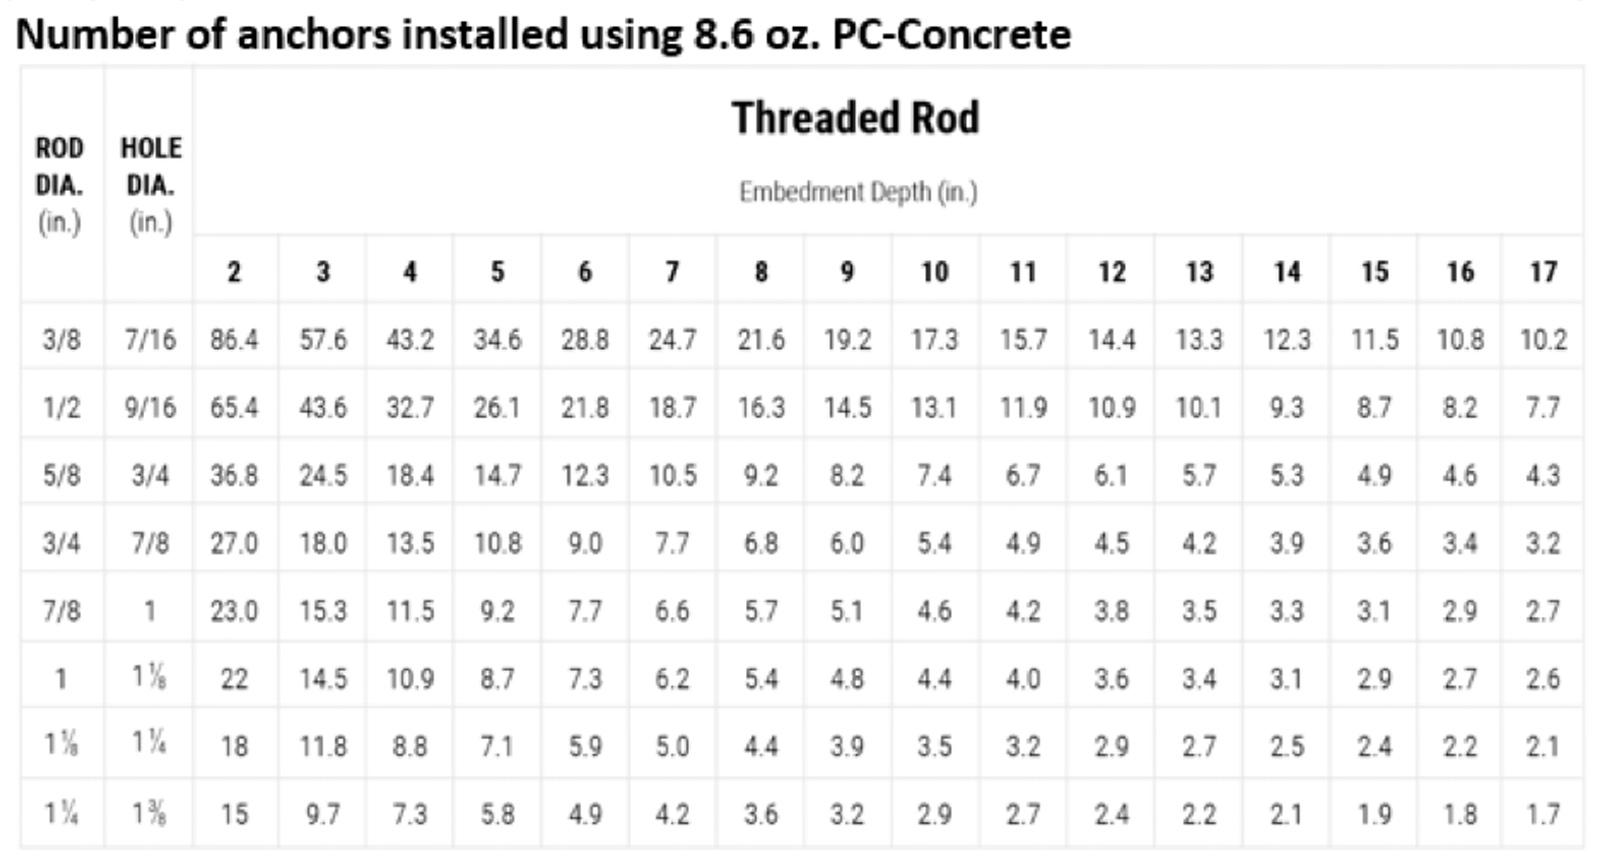 PC Concrete - Number of Anchors Installed Using 8.6oz PC-Concrete